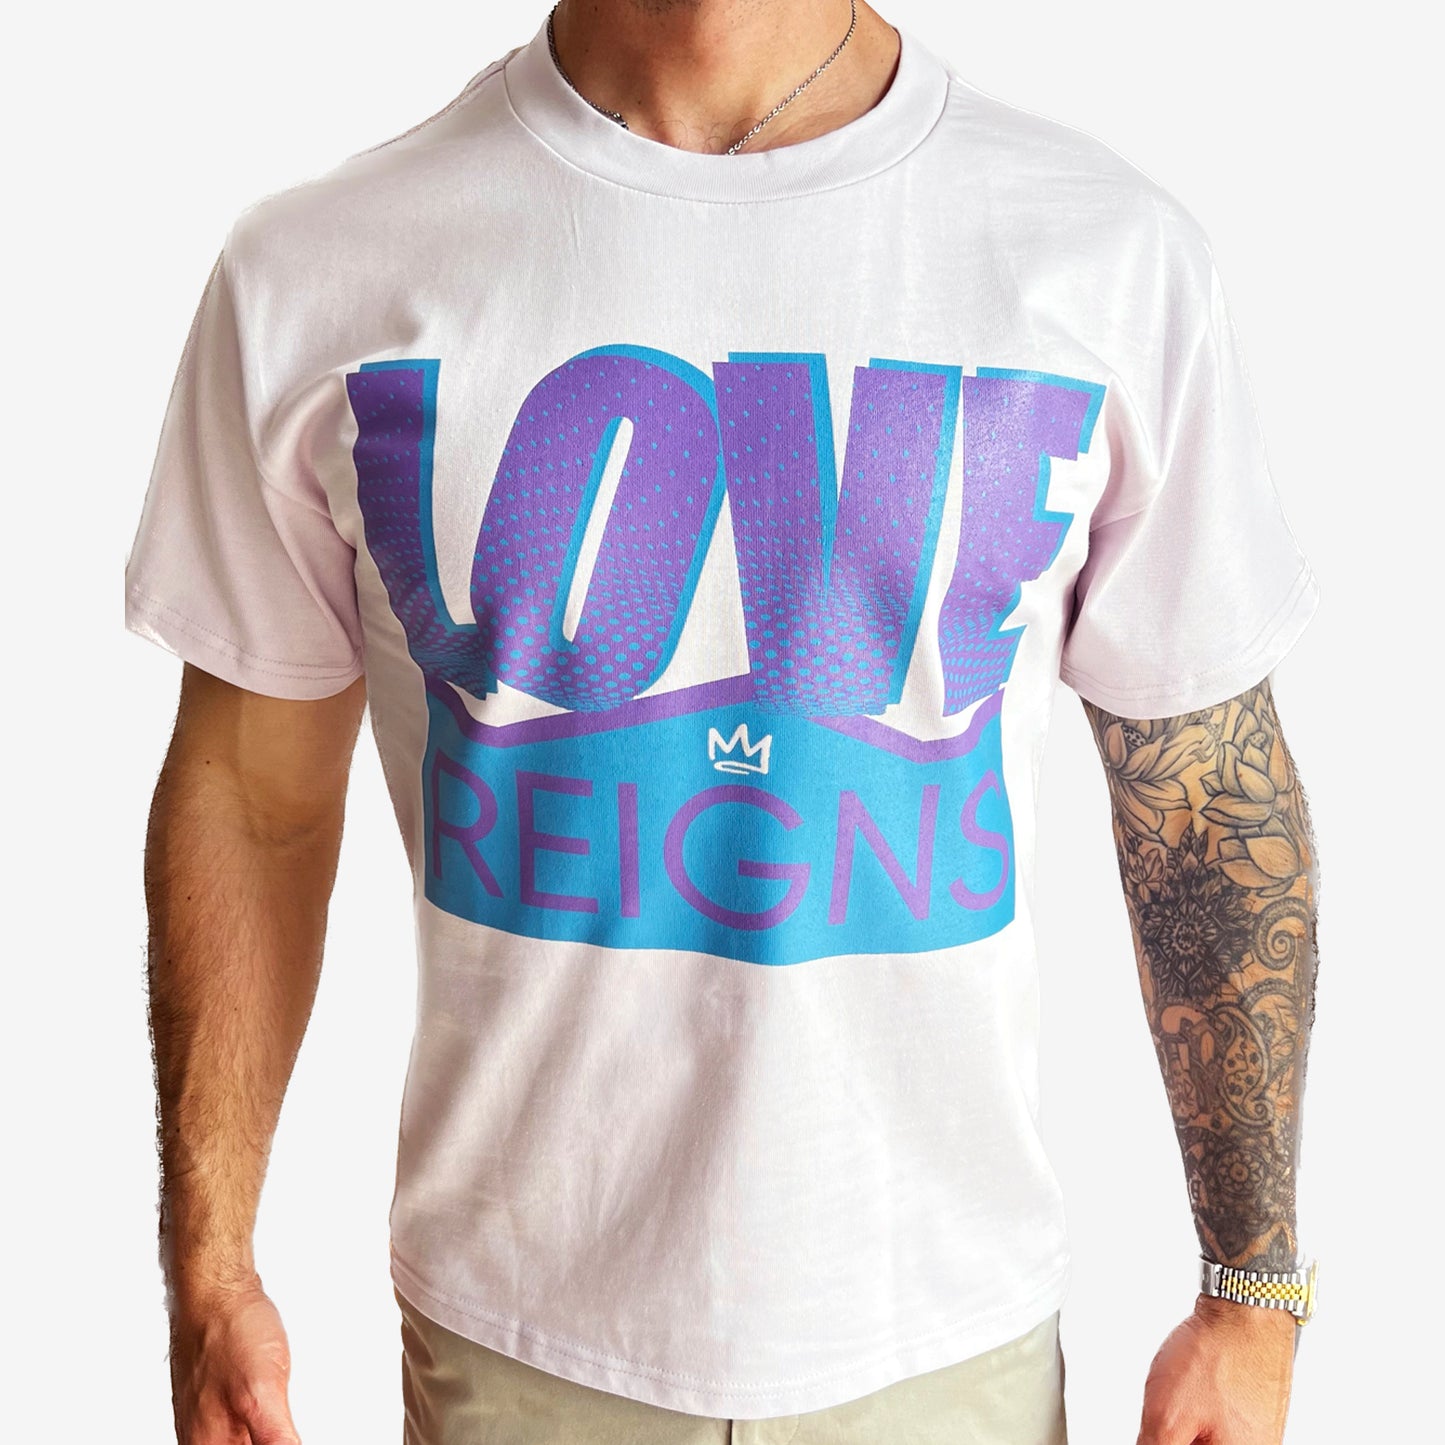 Love Reigns Oversized Boxy Printed Tee - Parma Violet